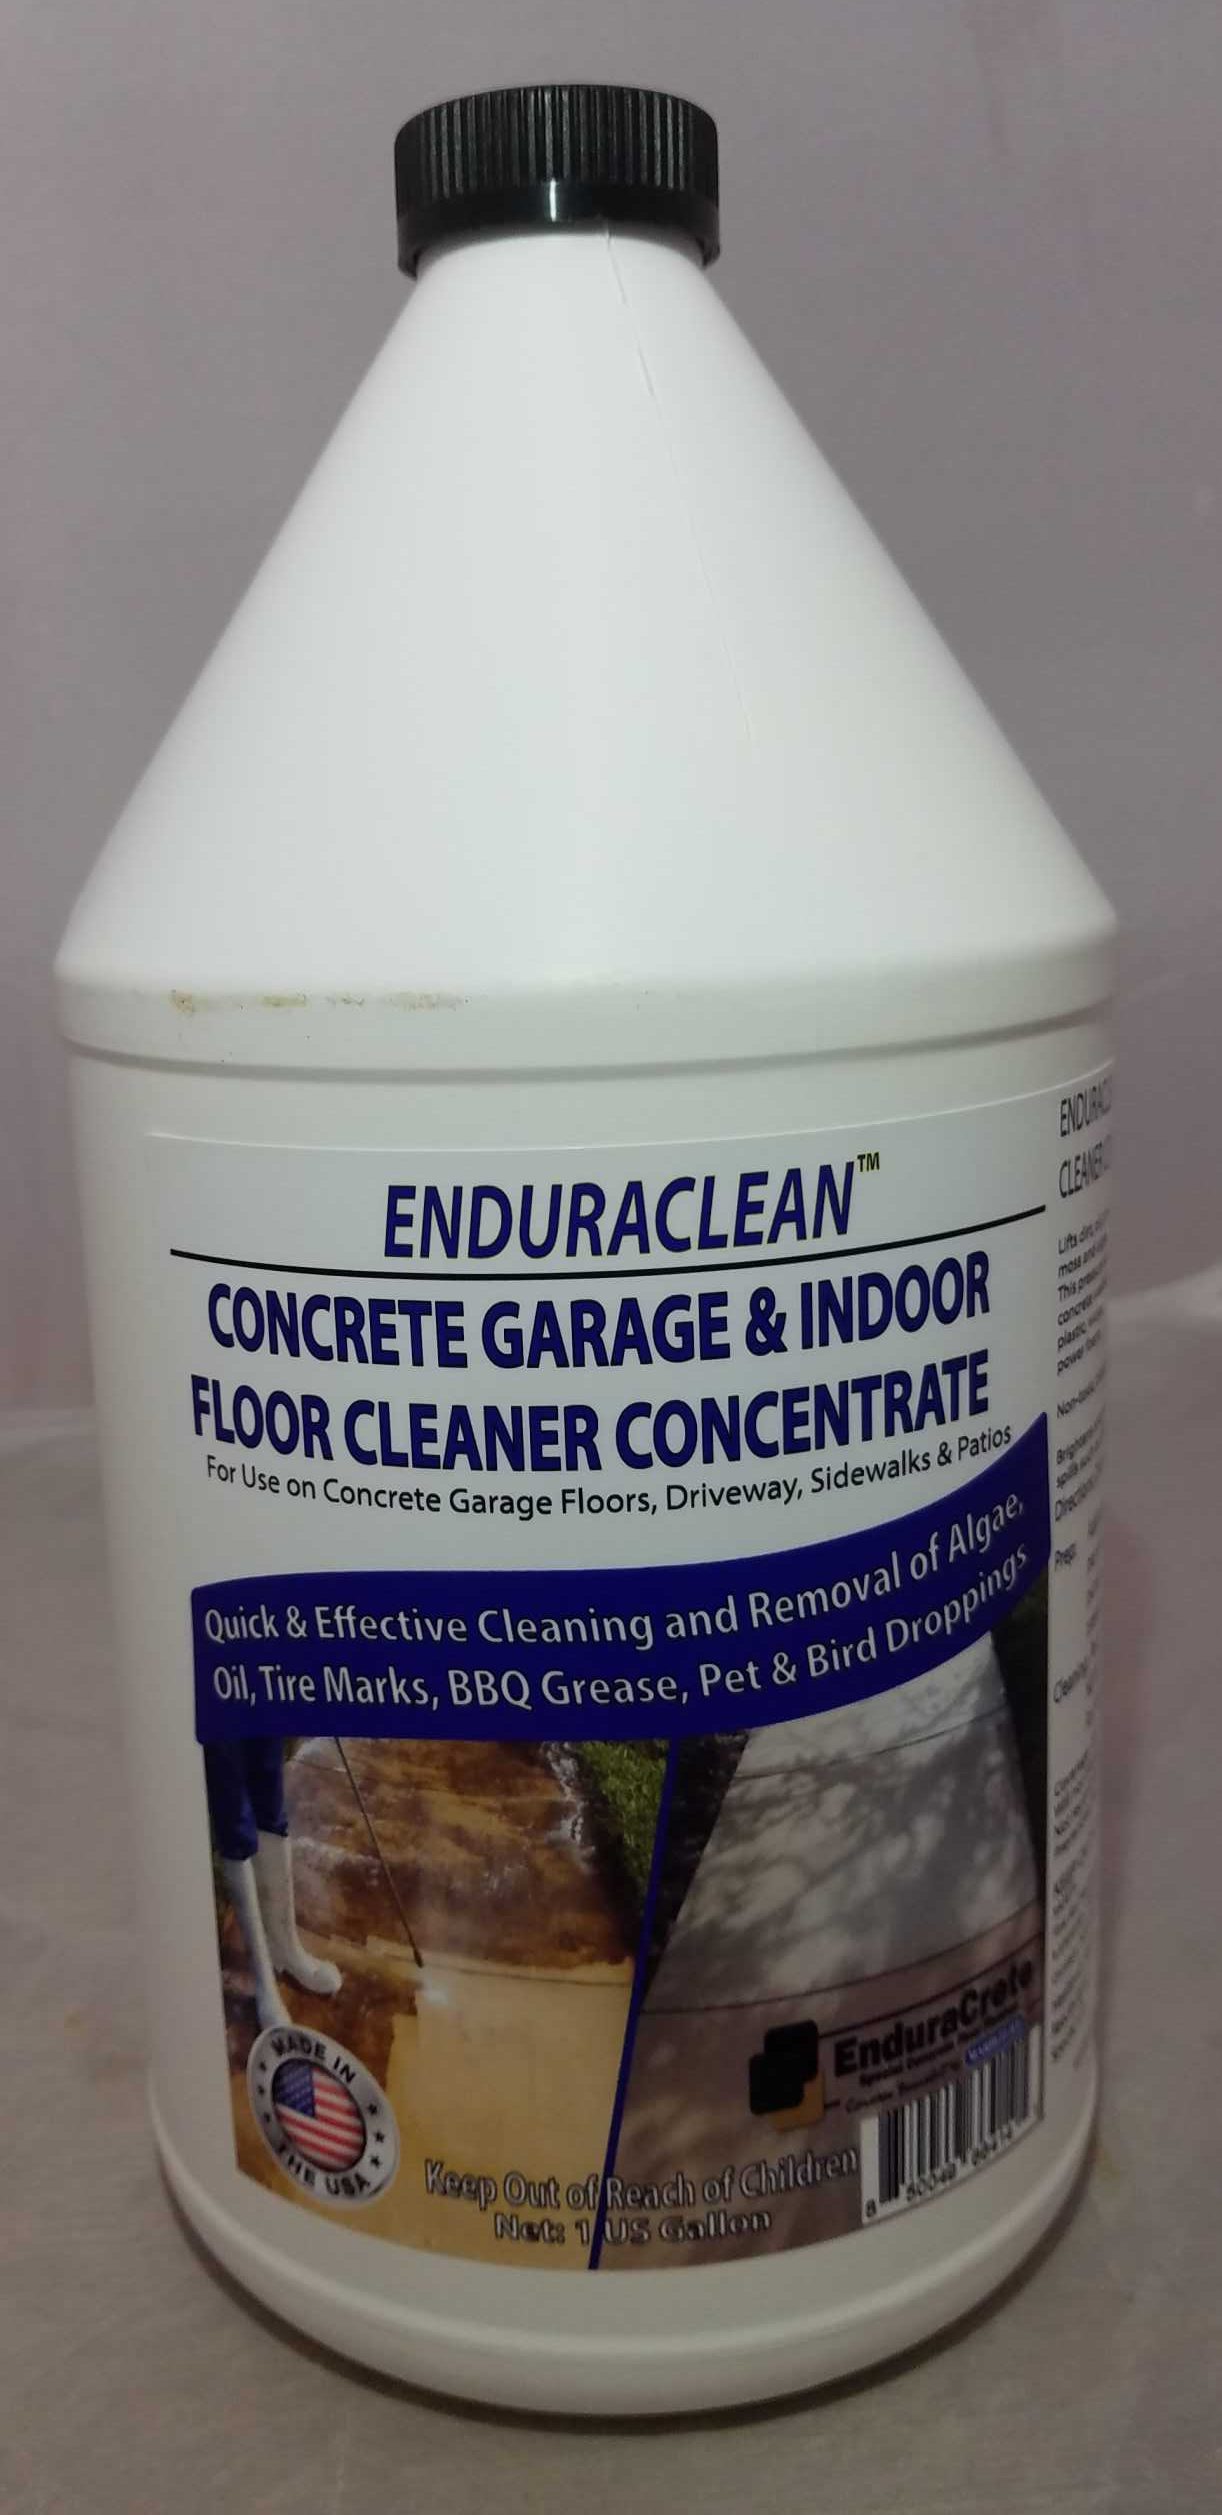 51010-128 - FRONT - ENDURACLEAN CONCRETE GARAGE FLOOR CLEANER CONCENTRATE